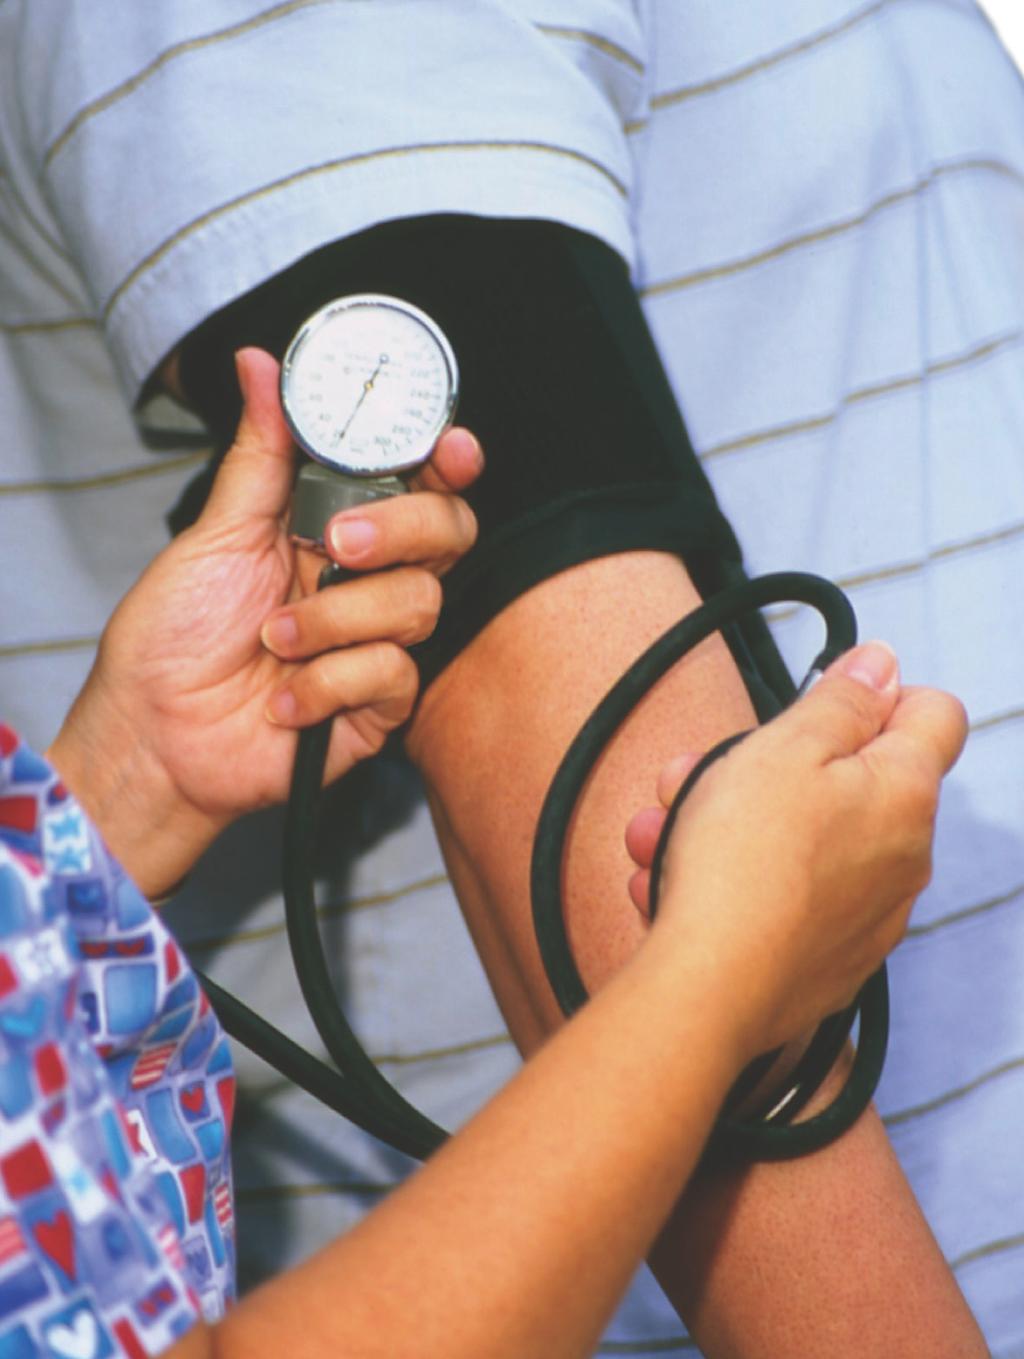 Most of the time, there are no symptoms, but when high blood pressure goes untreated, it damages arteries and vital organs throughout the body.